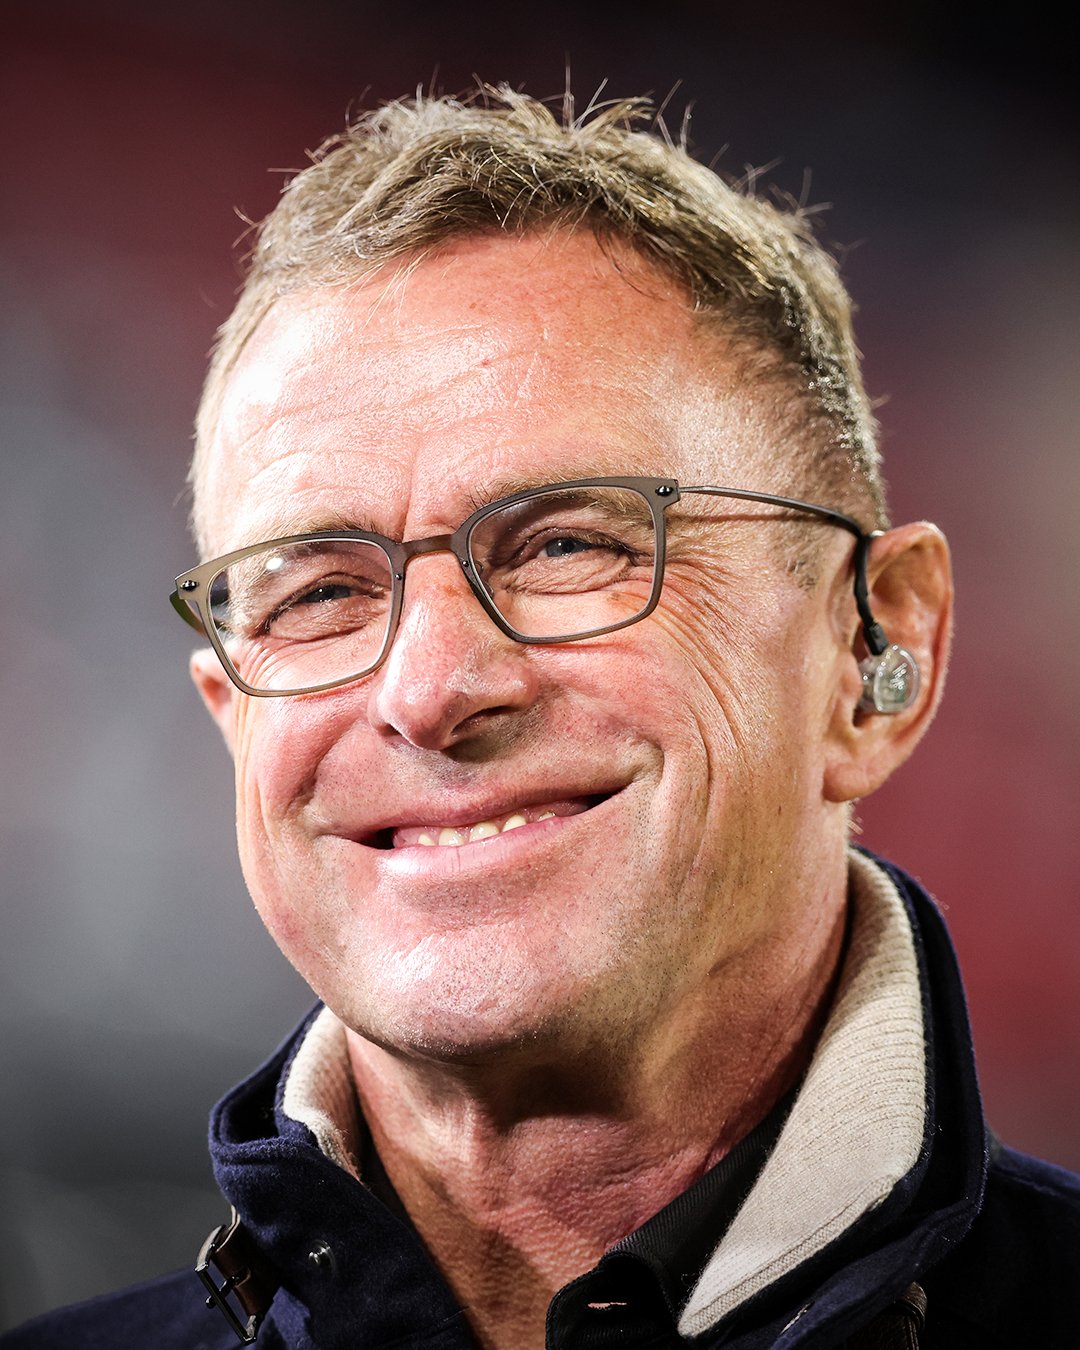 Manchester United Appoint Ralf Rangnick As Interim Manager